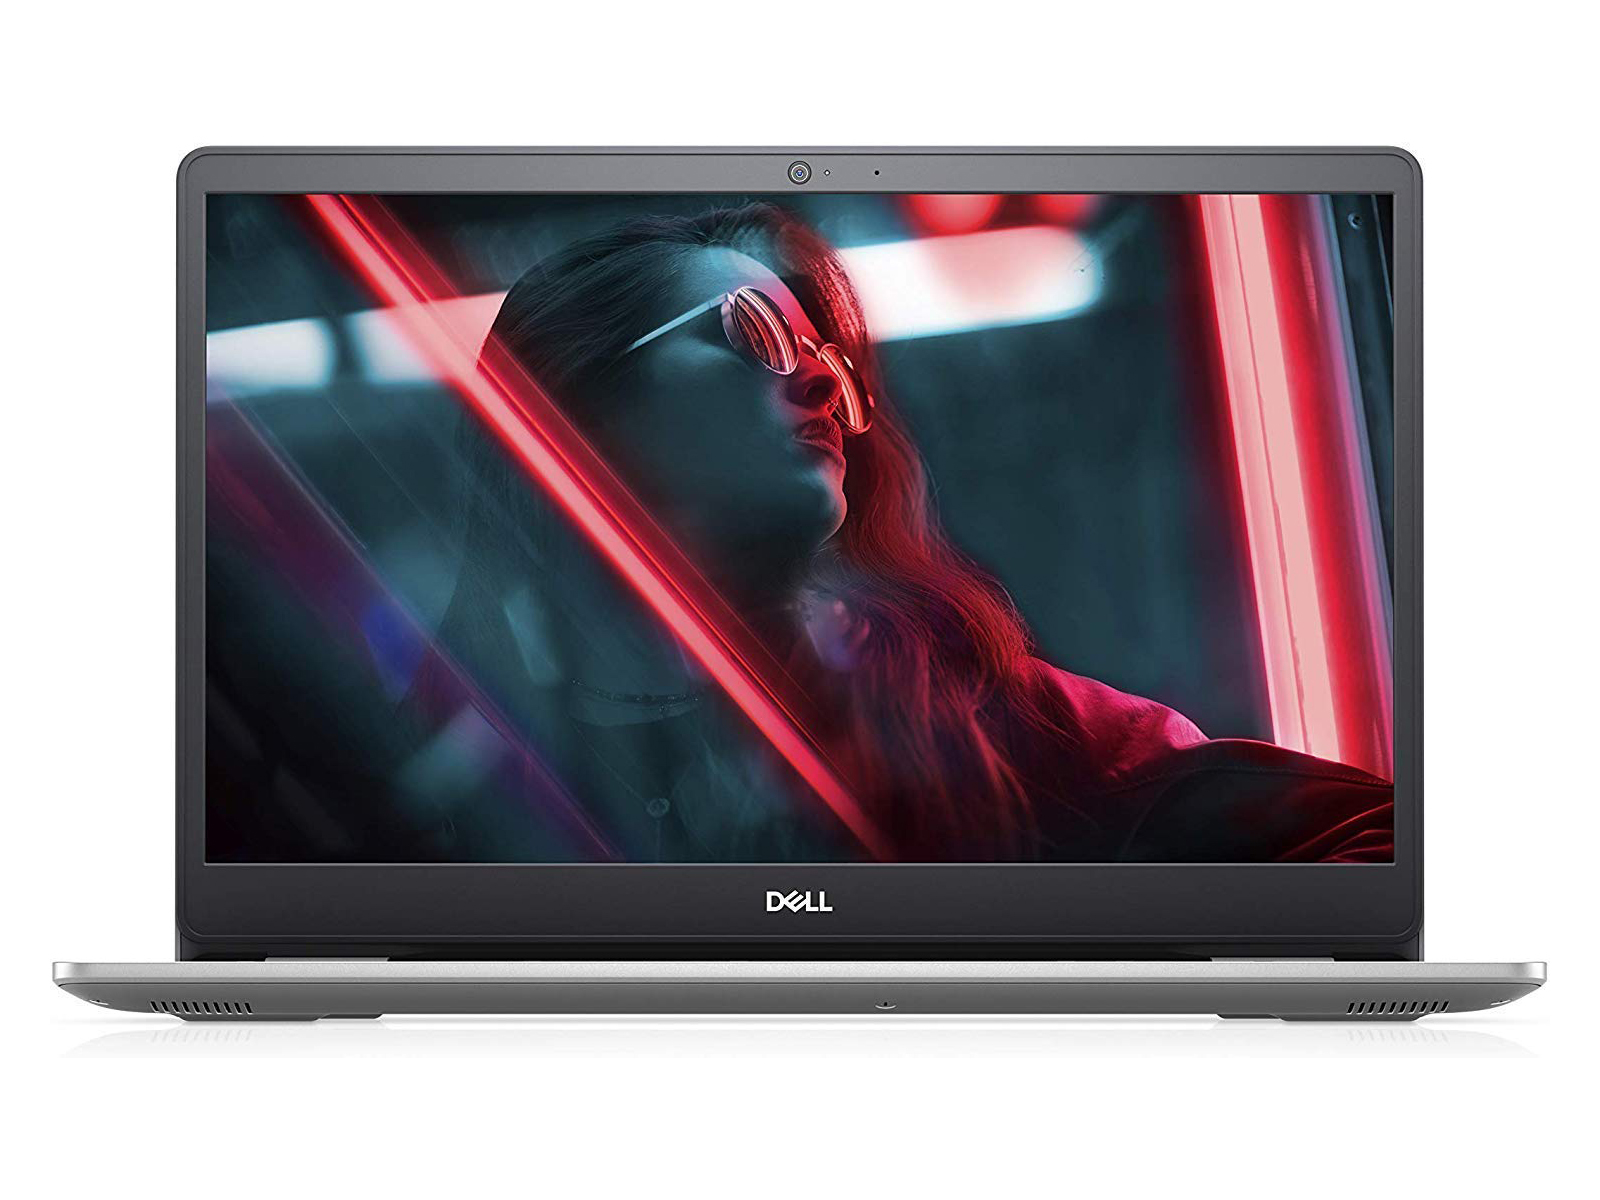  Dell Inspiron 15 5593 Notebook